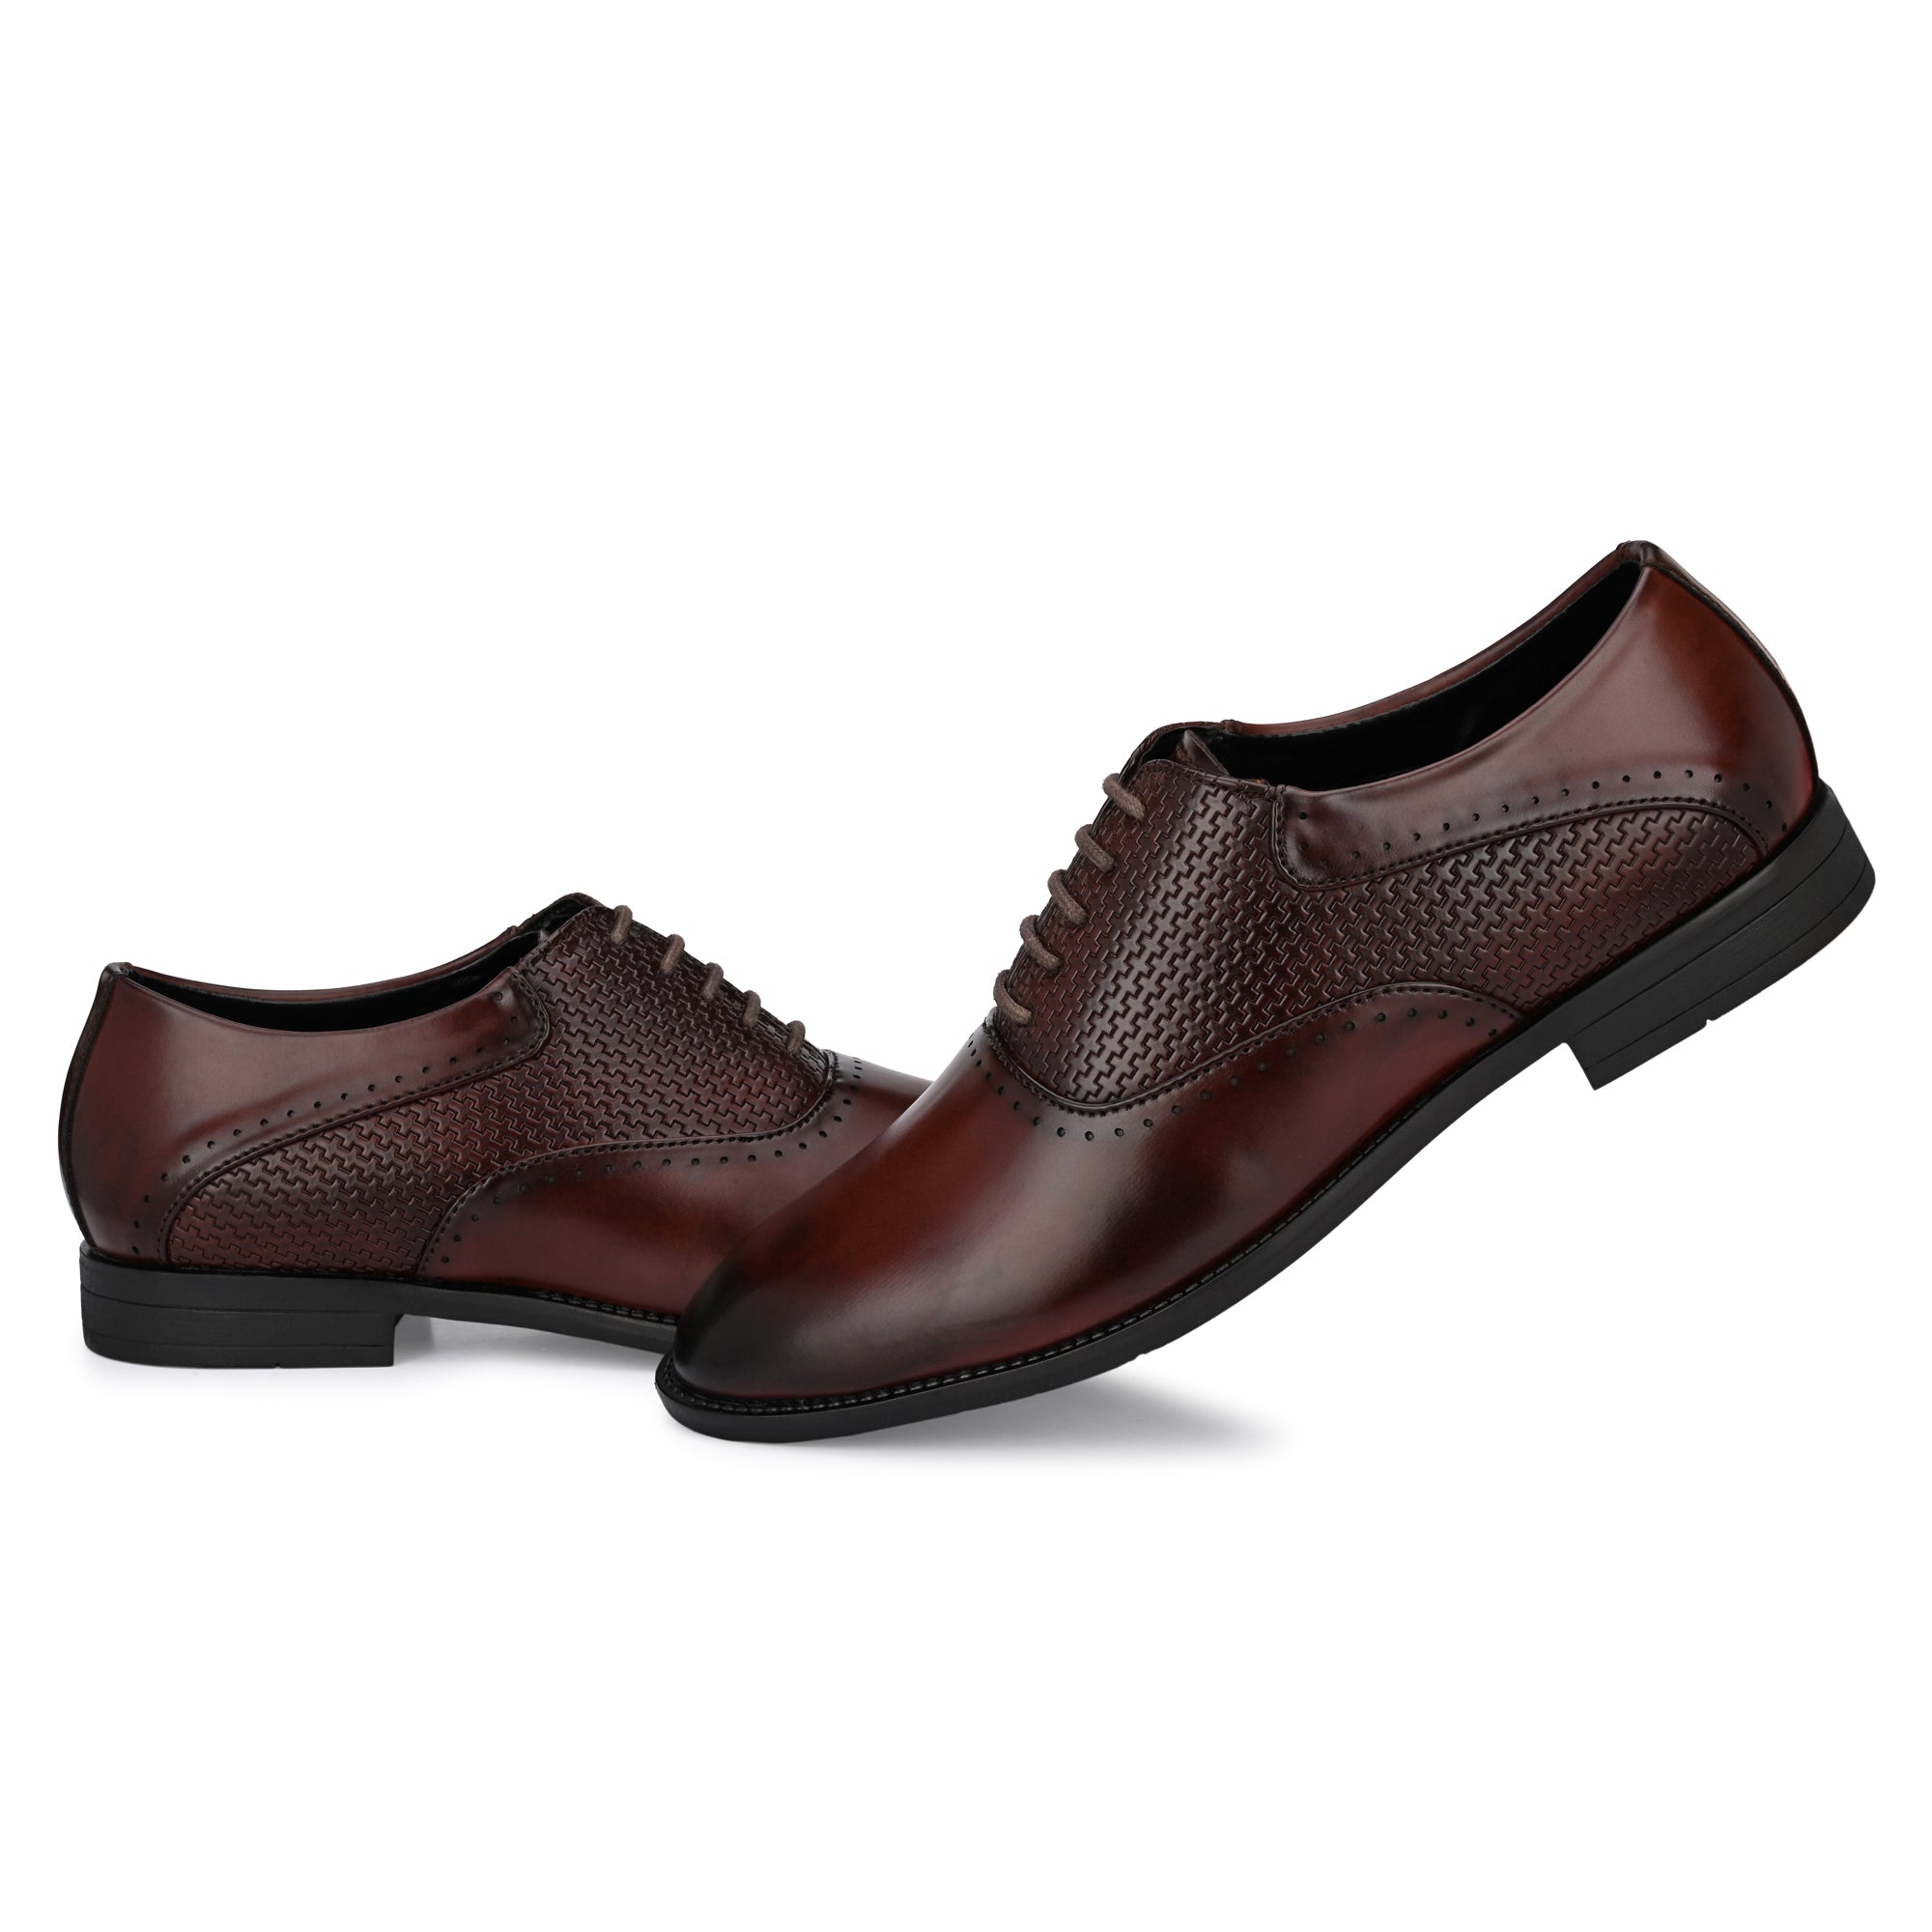 Attitudist Handcrafted Oxford Gradient Brown Formal Laceup Derby Shoes With Semi Chatai Design For Men MTOBSF